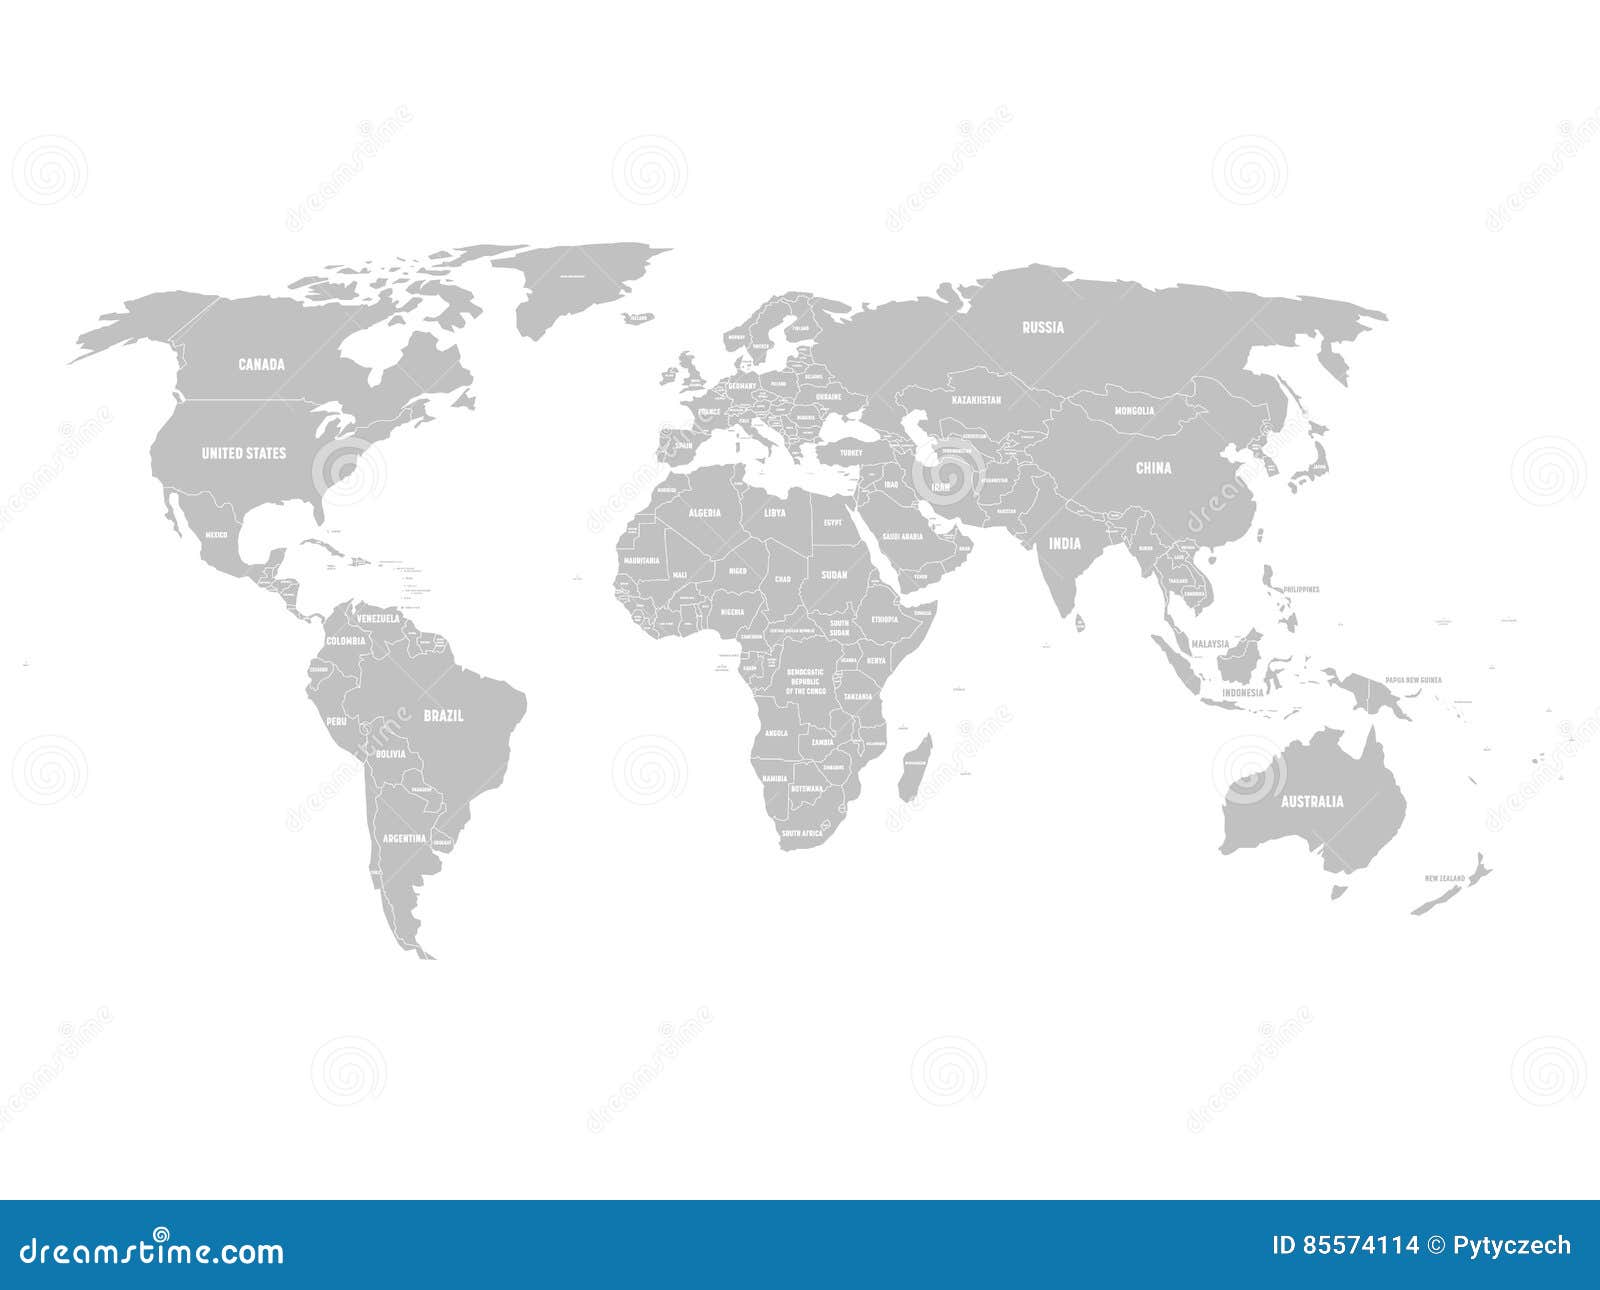 world map vector countries